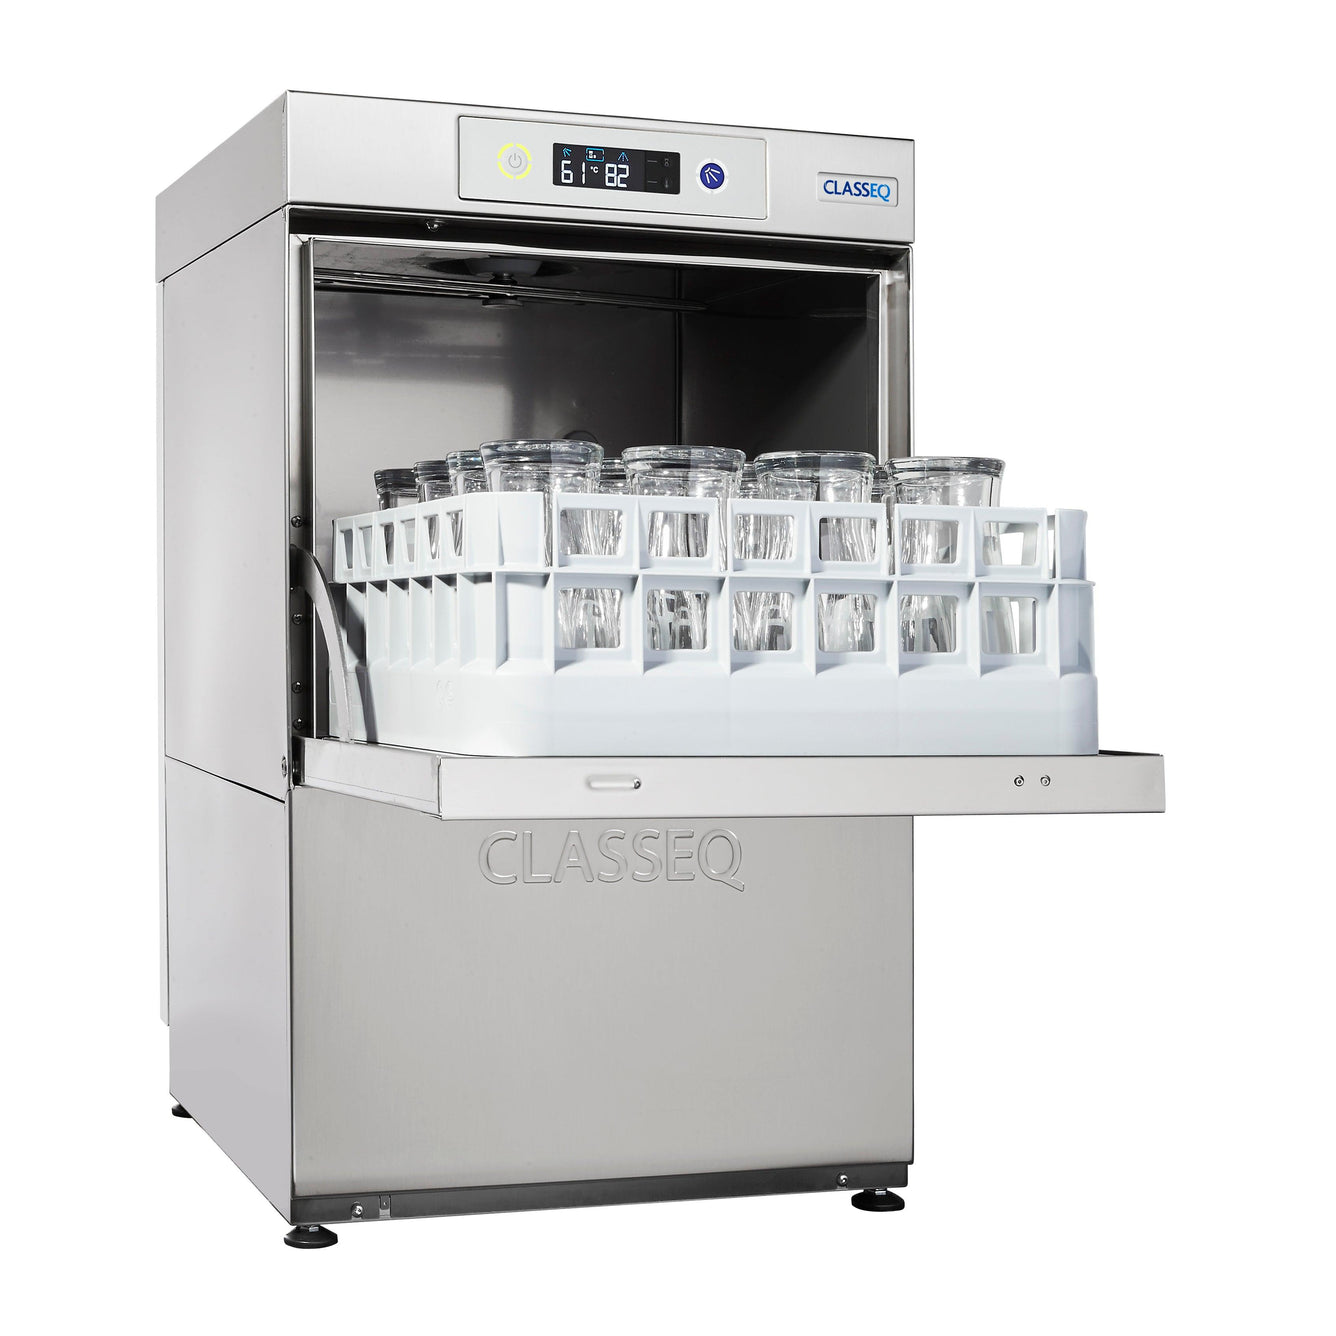 G400 Gravity Drain Classeq Glass Washer - Clear Cool